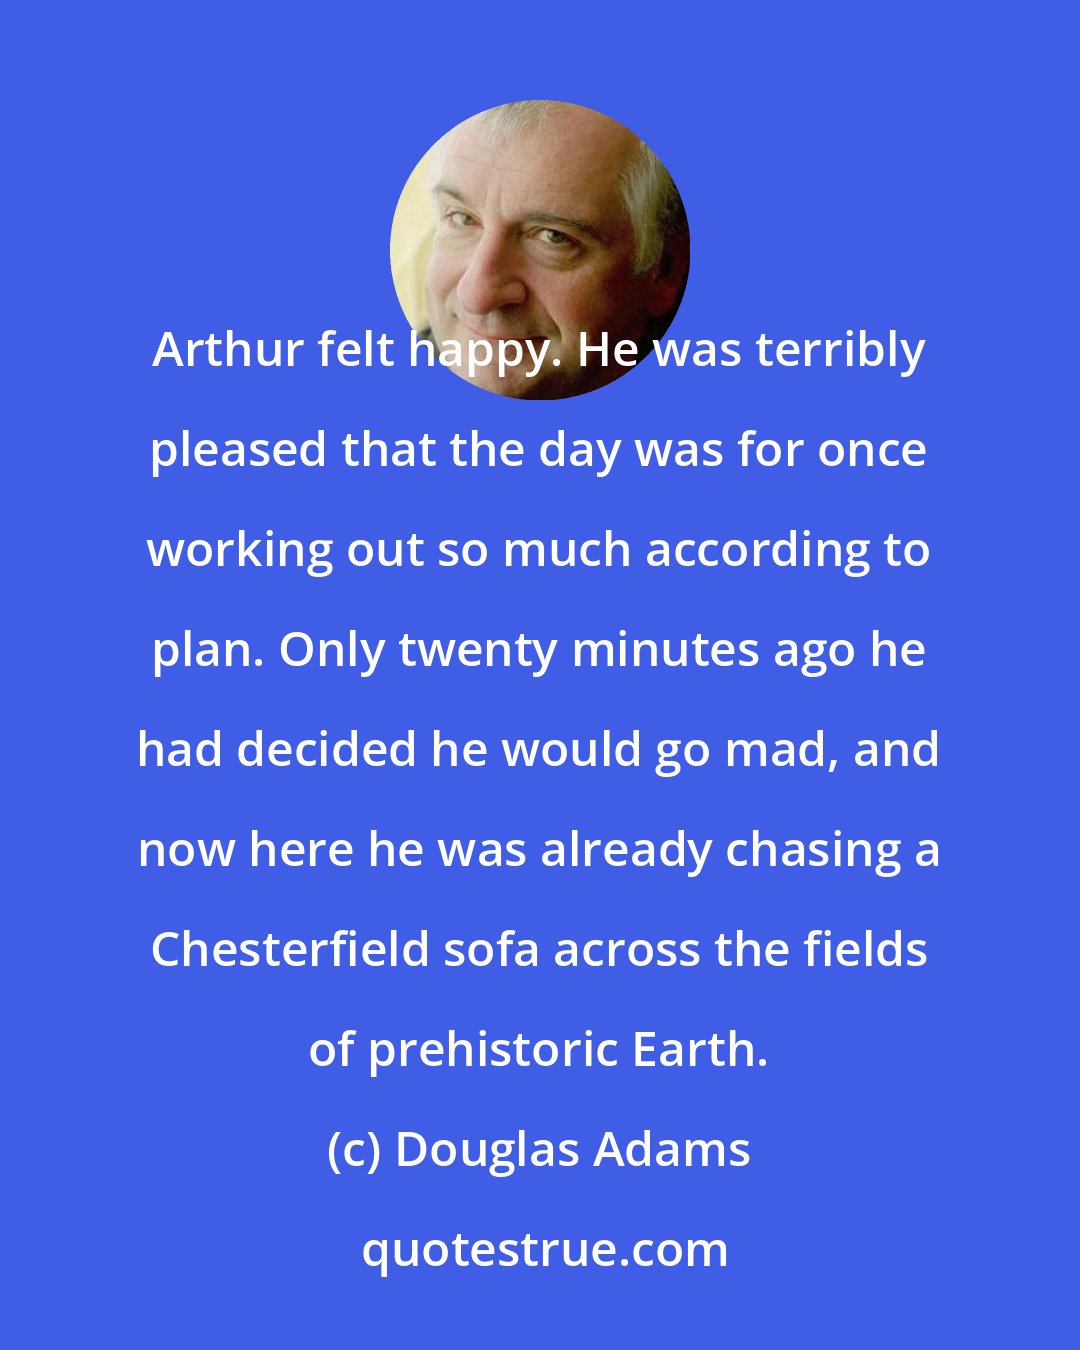 Douglas Adams: Arthur felt happy. He was terribly pleased that the day was for once working out so much according to plan. Only twenty minutes ago he had decided he would go mad, and now here he was already chasing a Chesterfield sofa across the fields of prehistoric Earth.